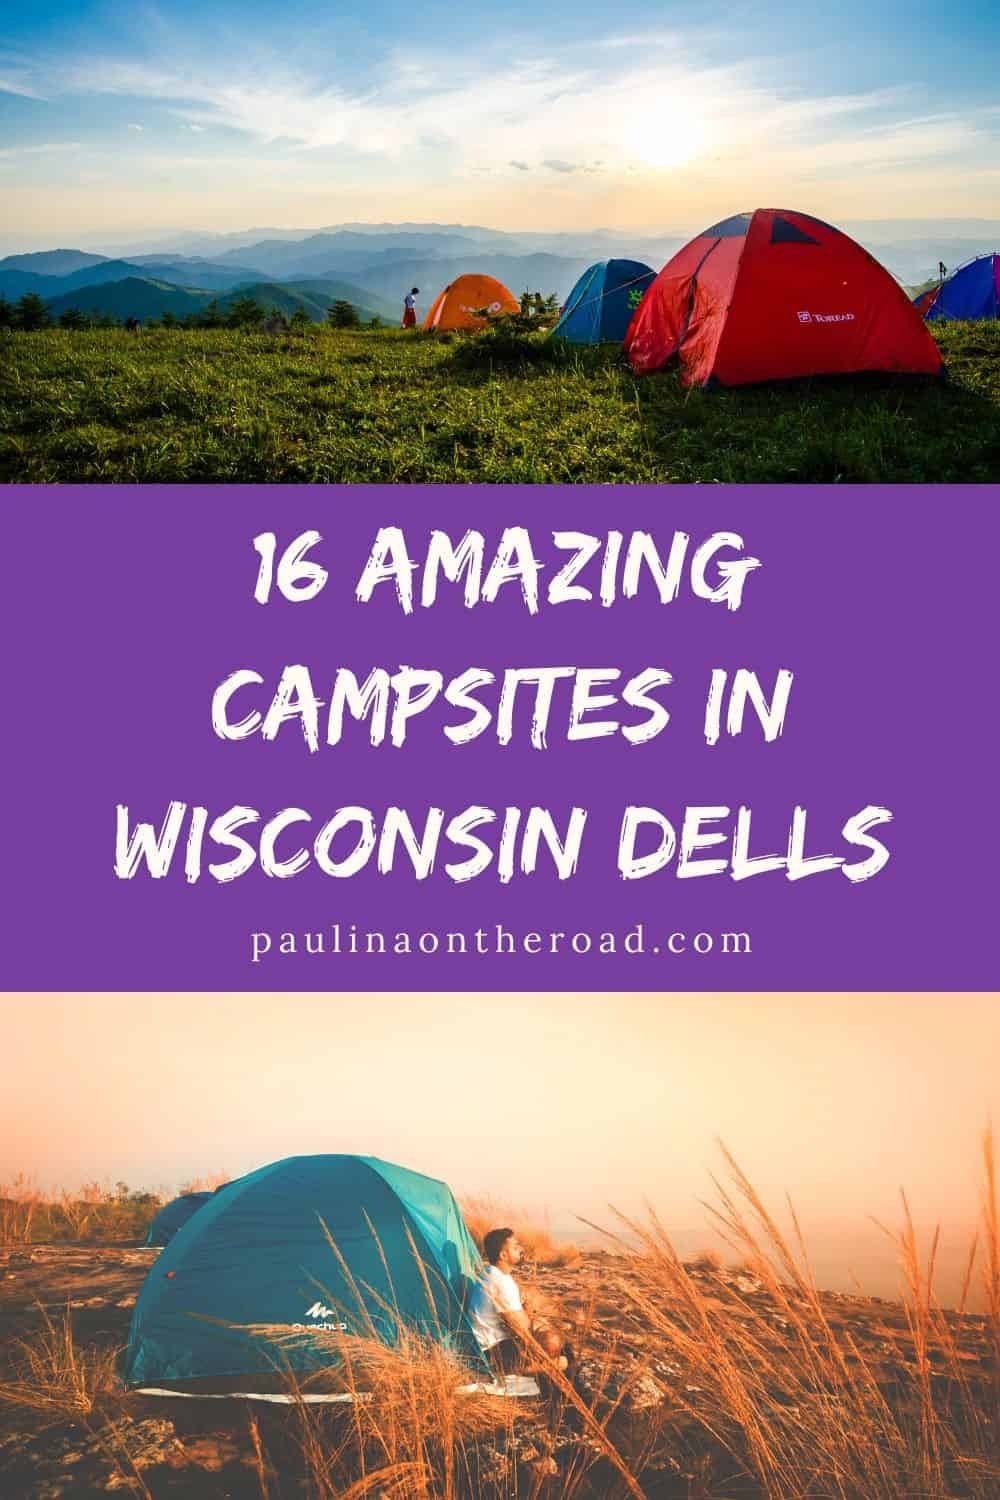 Are you planning a trip to Wisconsin Dells in the summer? Considering staying in some of the best campsites in Wisconsin Dells, which are perfect for families and romantic getaways. This guide has all the best places to go camping in Wisconsin Dells and the surrounding area, including where to get camping cabins in Wisconsin Dells and adult-only campgrounds. #Wisconsin #WisconsinDells #Camping #Campsites #WisconsinCampsites #CampingCabin #DellsCamping #WisconsinDellsCamping #Summer #RVPark